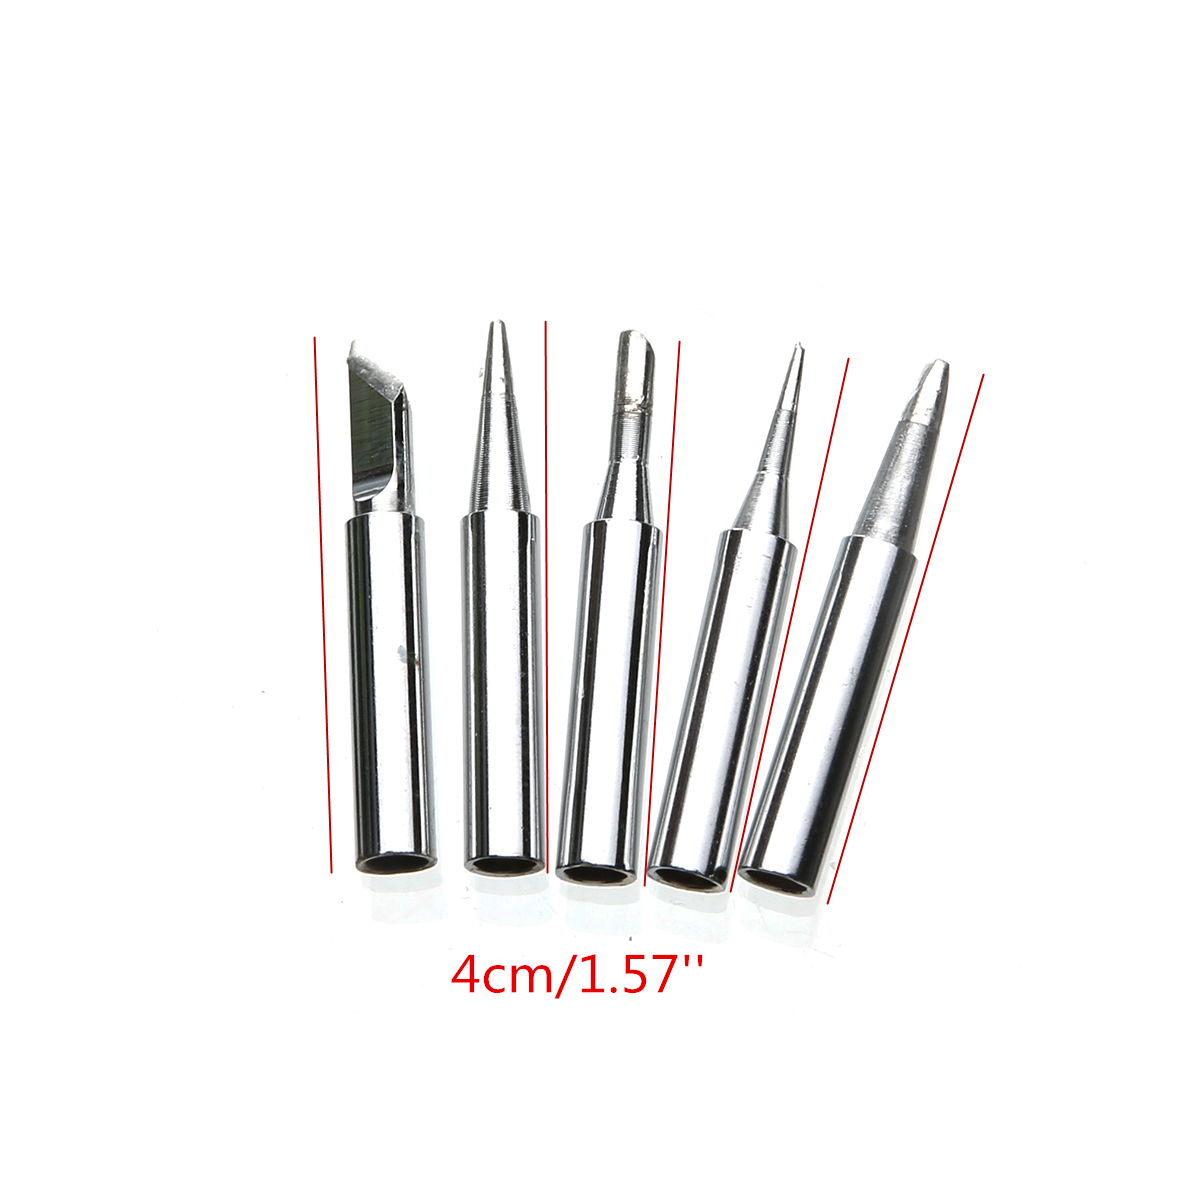 110V-Adjustable-Electric-Temperature-Welding-Solder-Iron-Tool-Solder-with-5Pcs-Tips-1299696-10